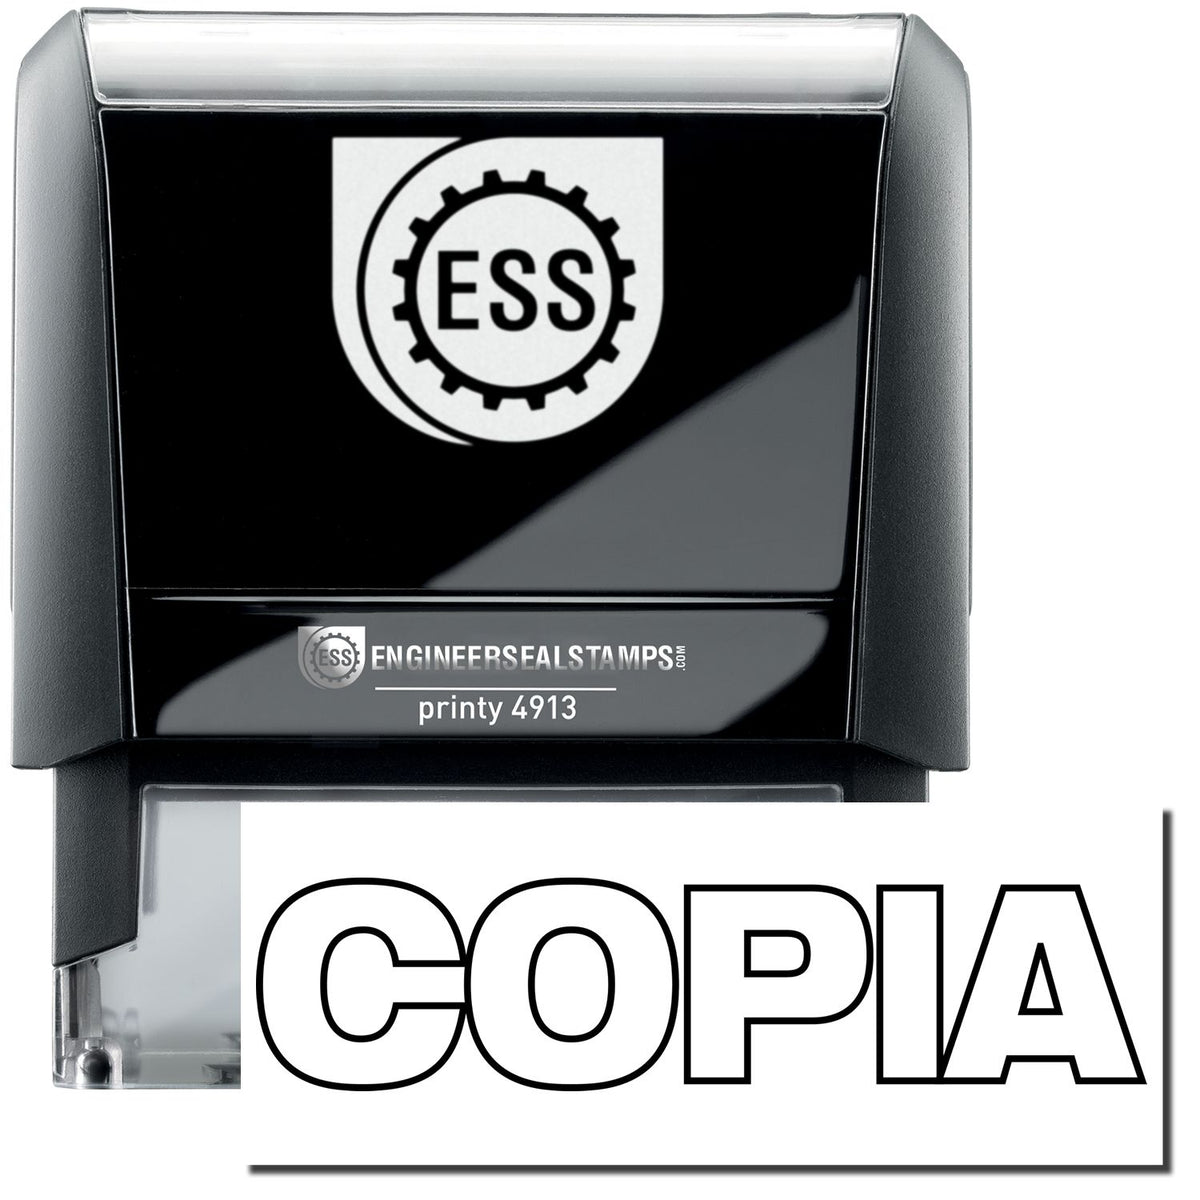 A self-inking stamp with a stamped image showing how the text &quot;COPIA&quot; in a large outline style is displayed by it after stamping.